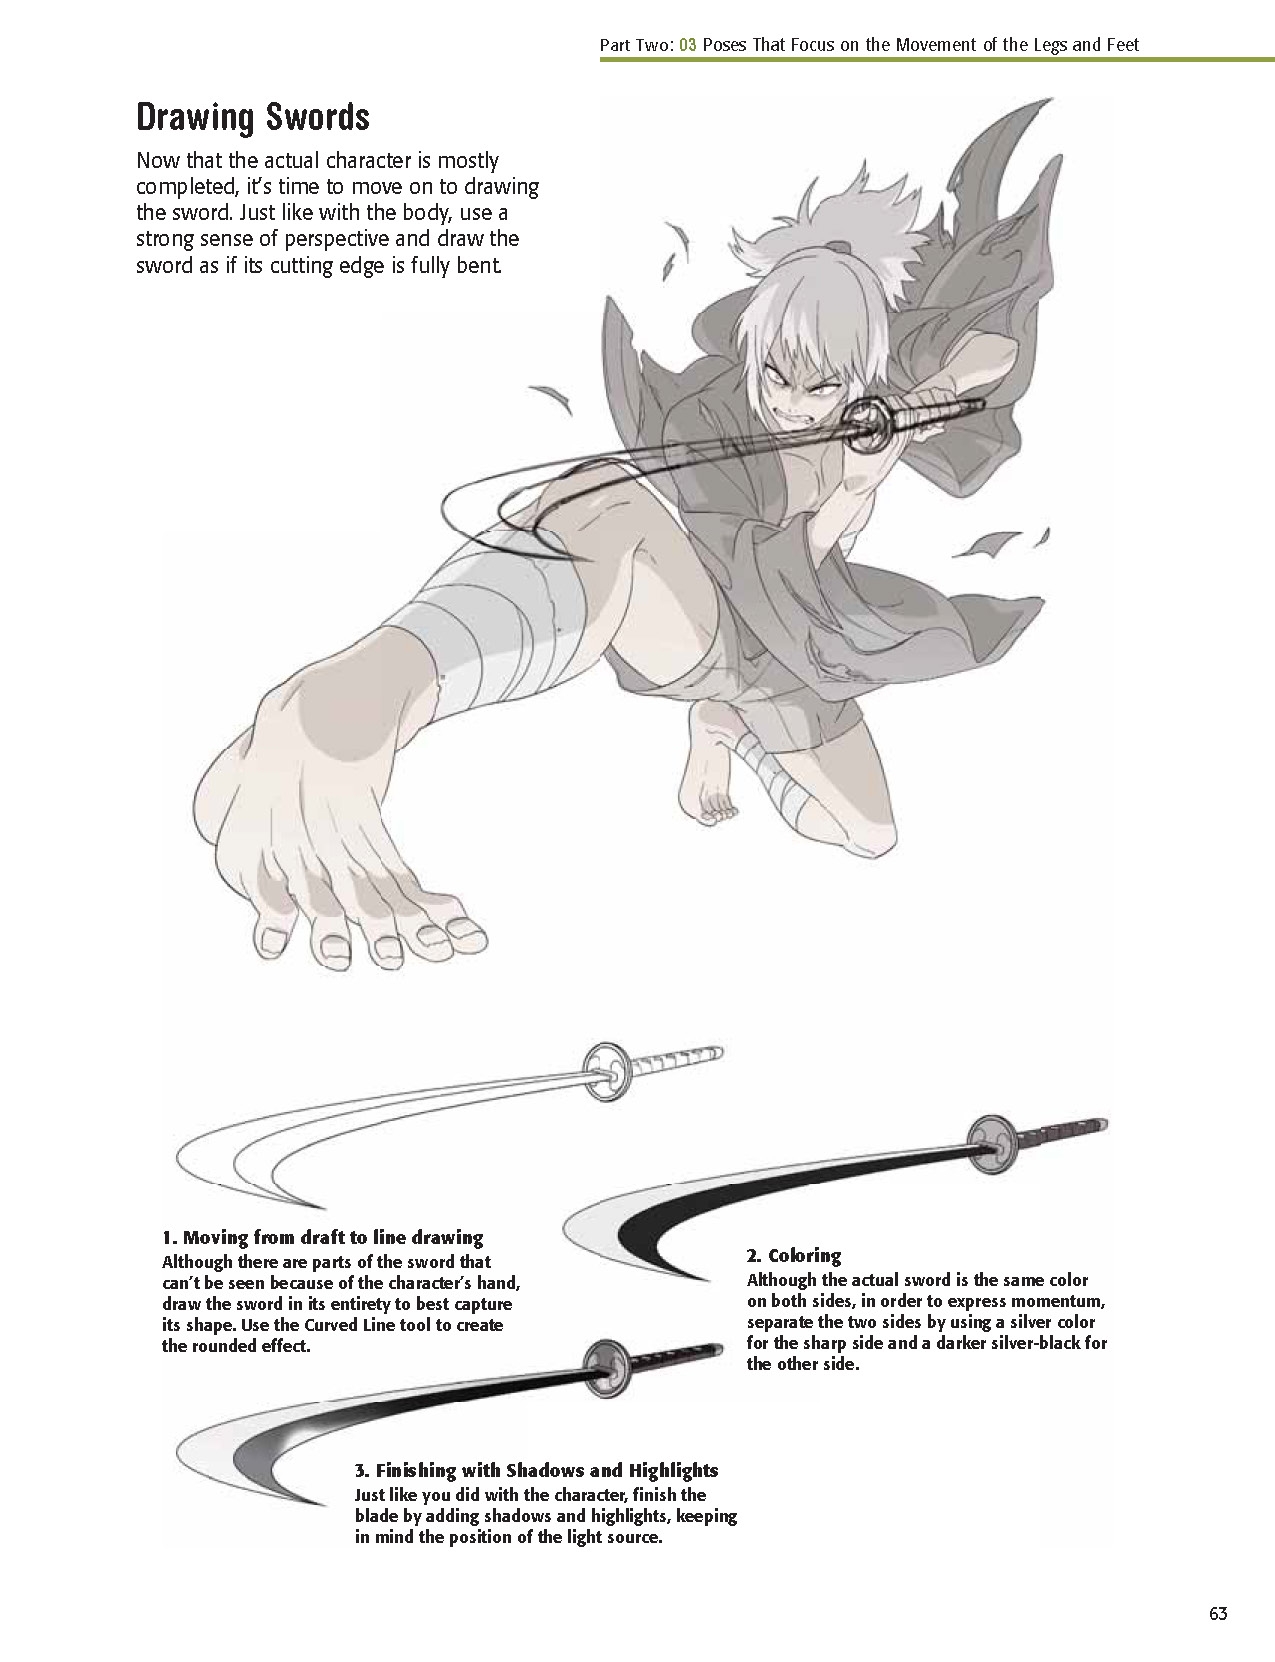 The Complete Guide to Drawing Dynamic Manga Sword Fighters: (An Action-Packed Guide with Over 600 illustrations) 64